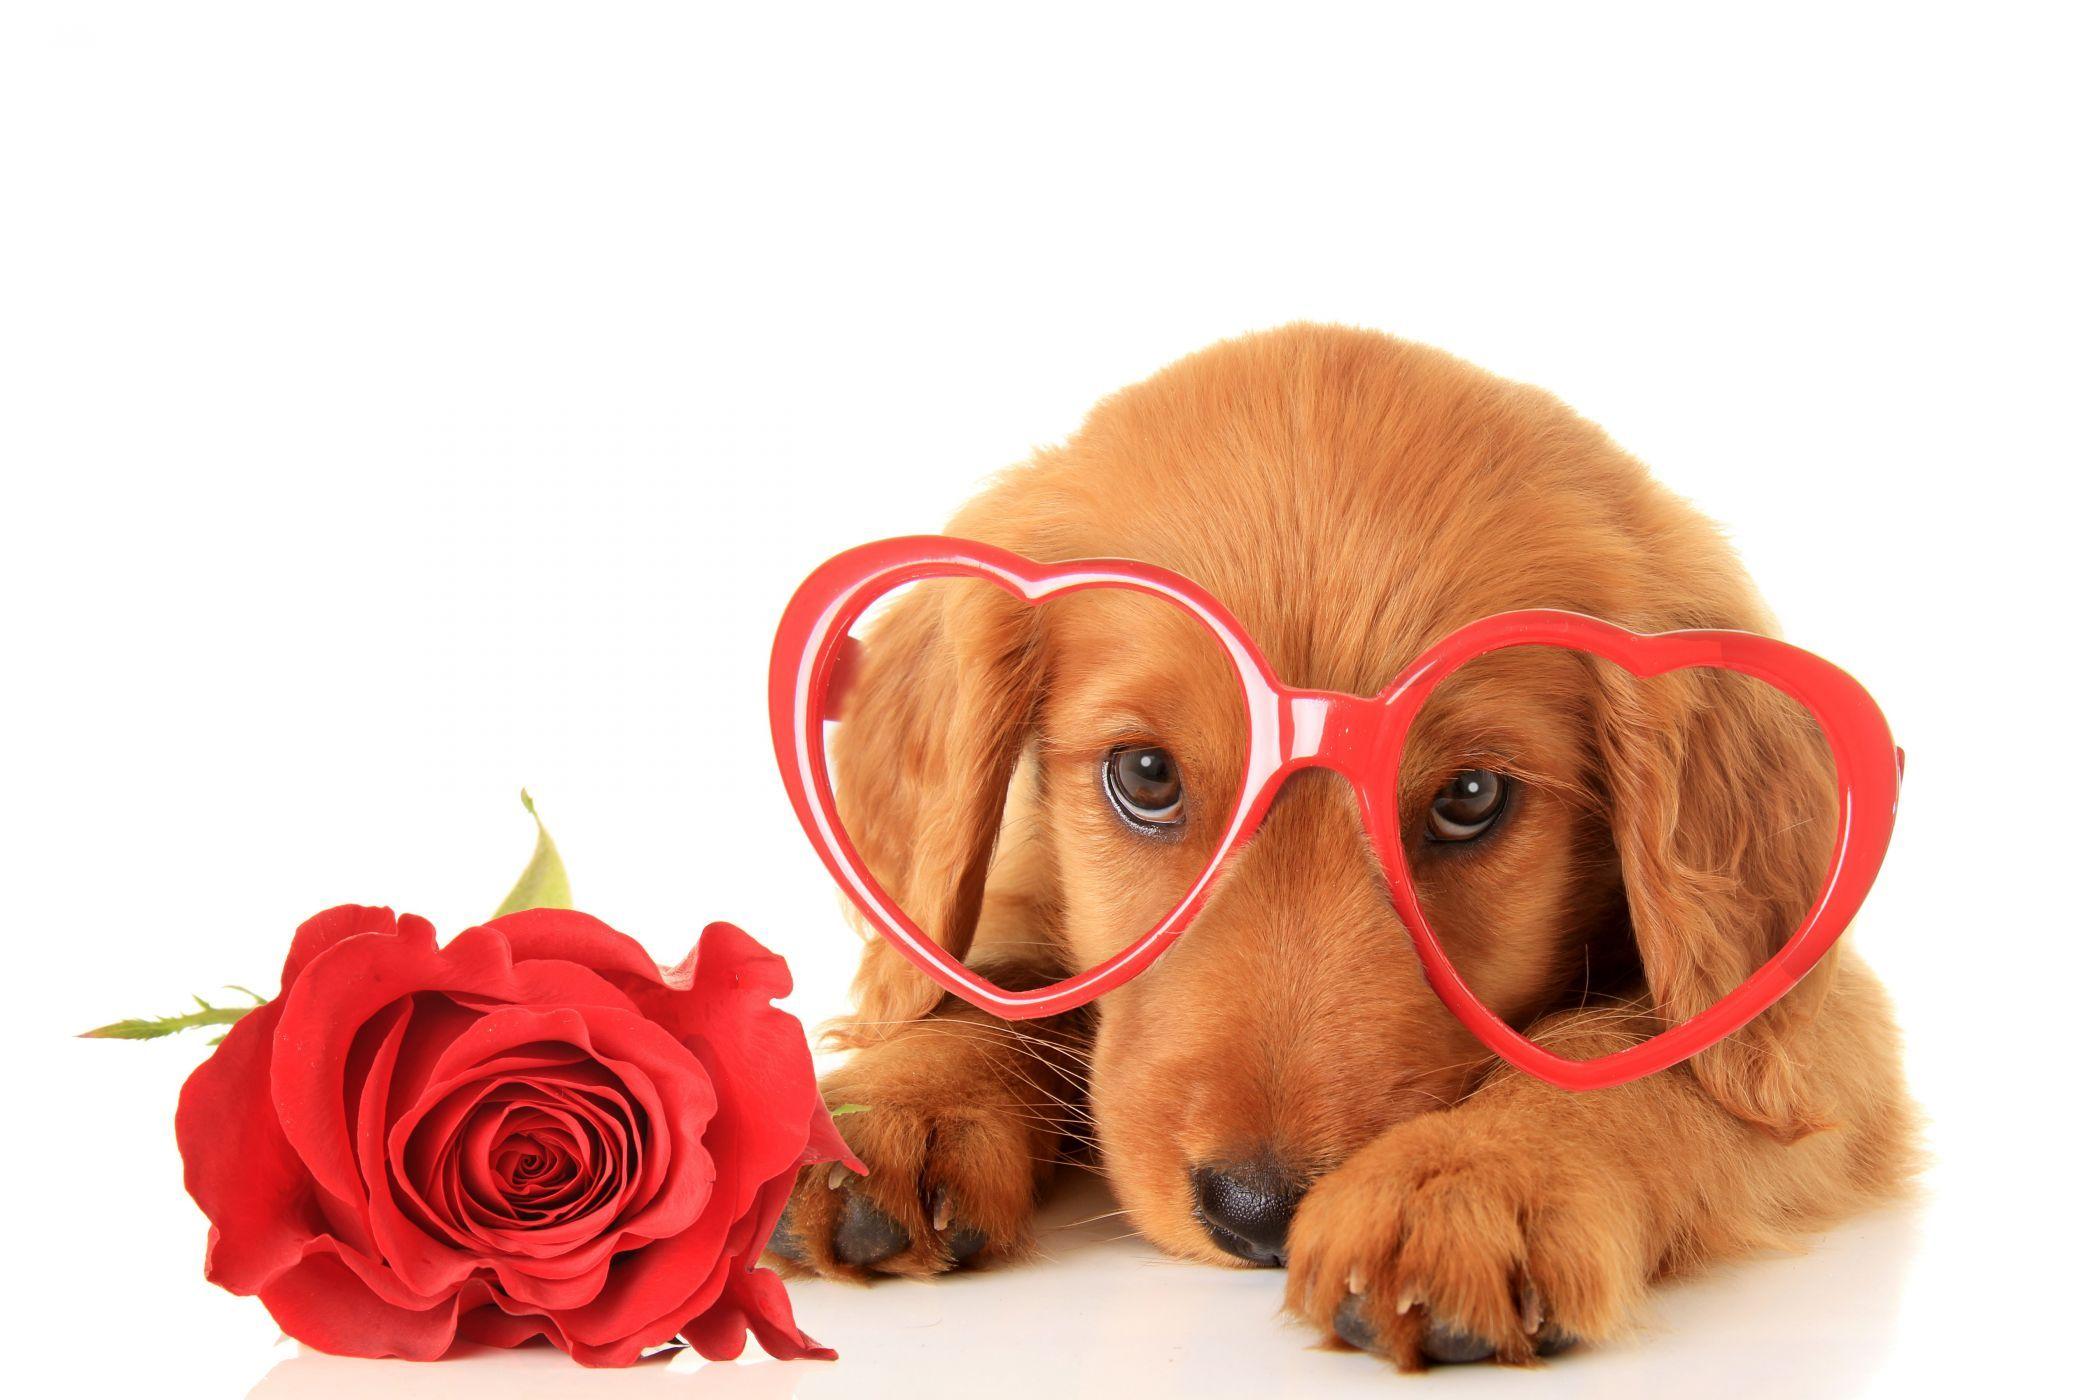 Valentine's Day Dogs Roses Retriever Glasses Heart Glance Animals wallpaper. Valentines day dog, Dog valentines, Valentines day cat